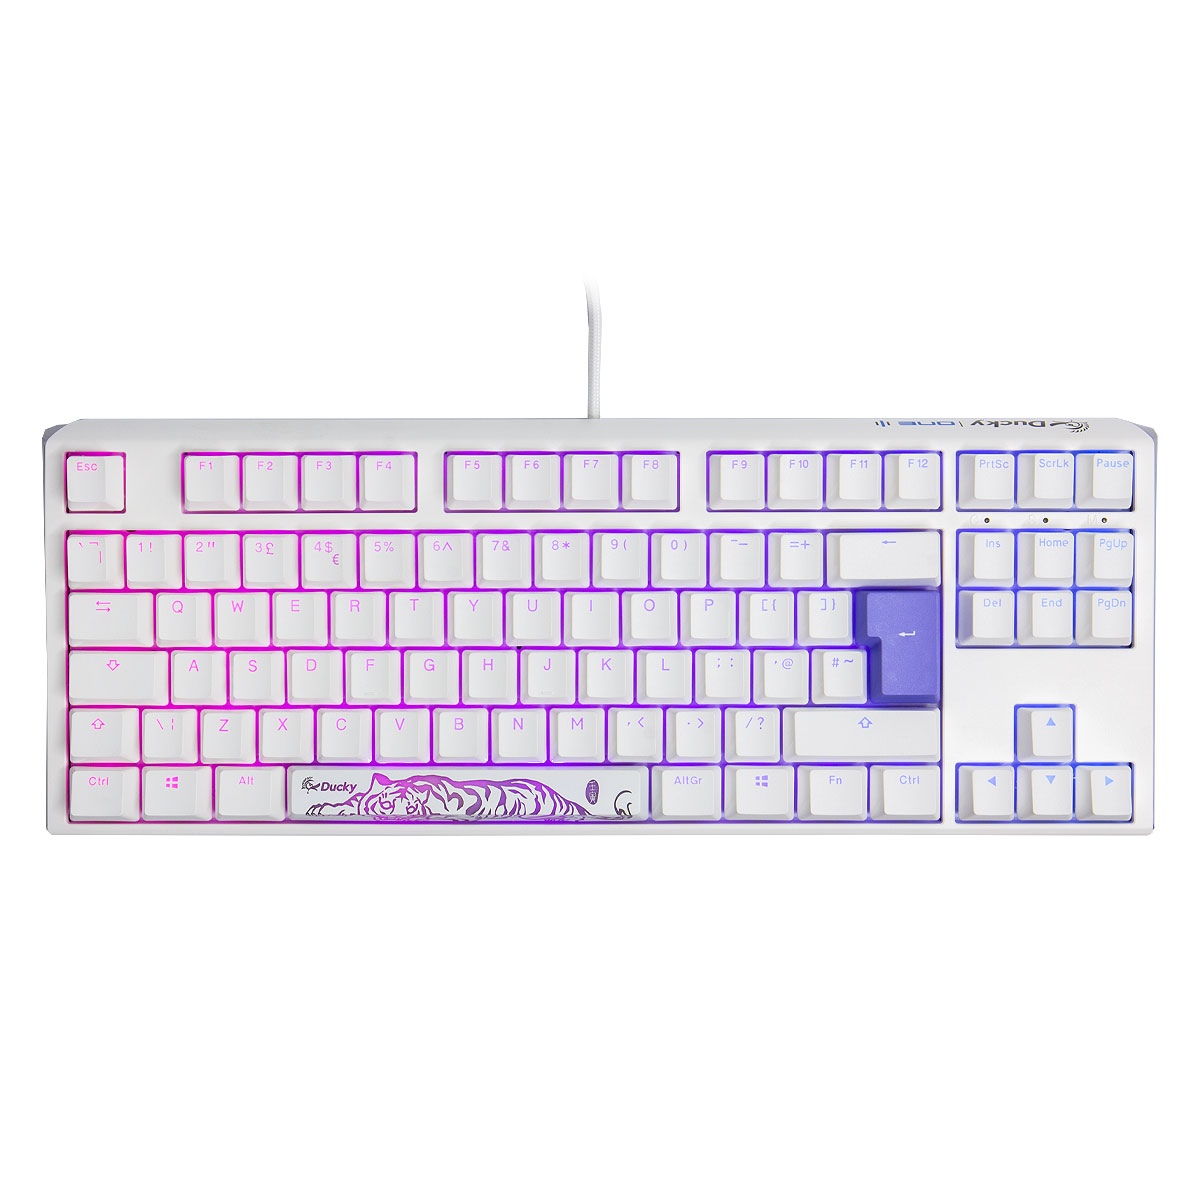 Ducky One 3 Classic TKL USB RGB Mechanical Gaming Keyboard Cherry Red - Pure White UK Layout